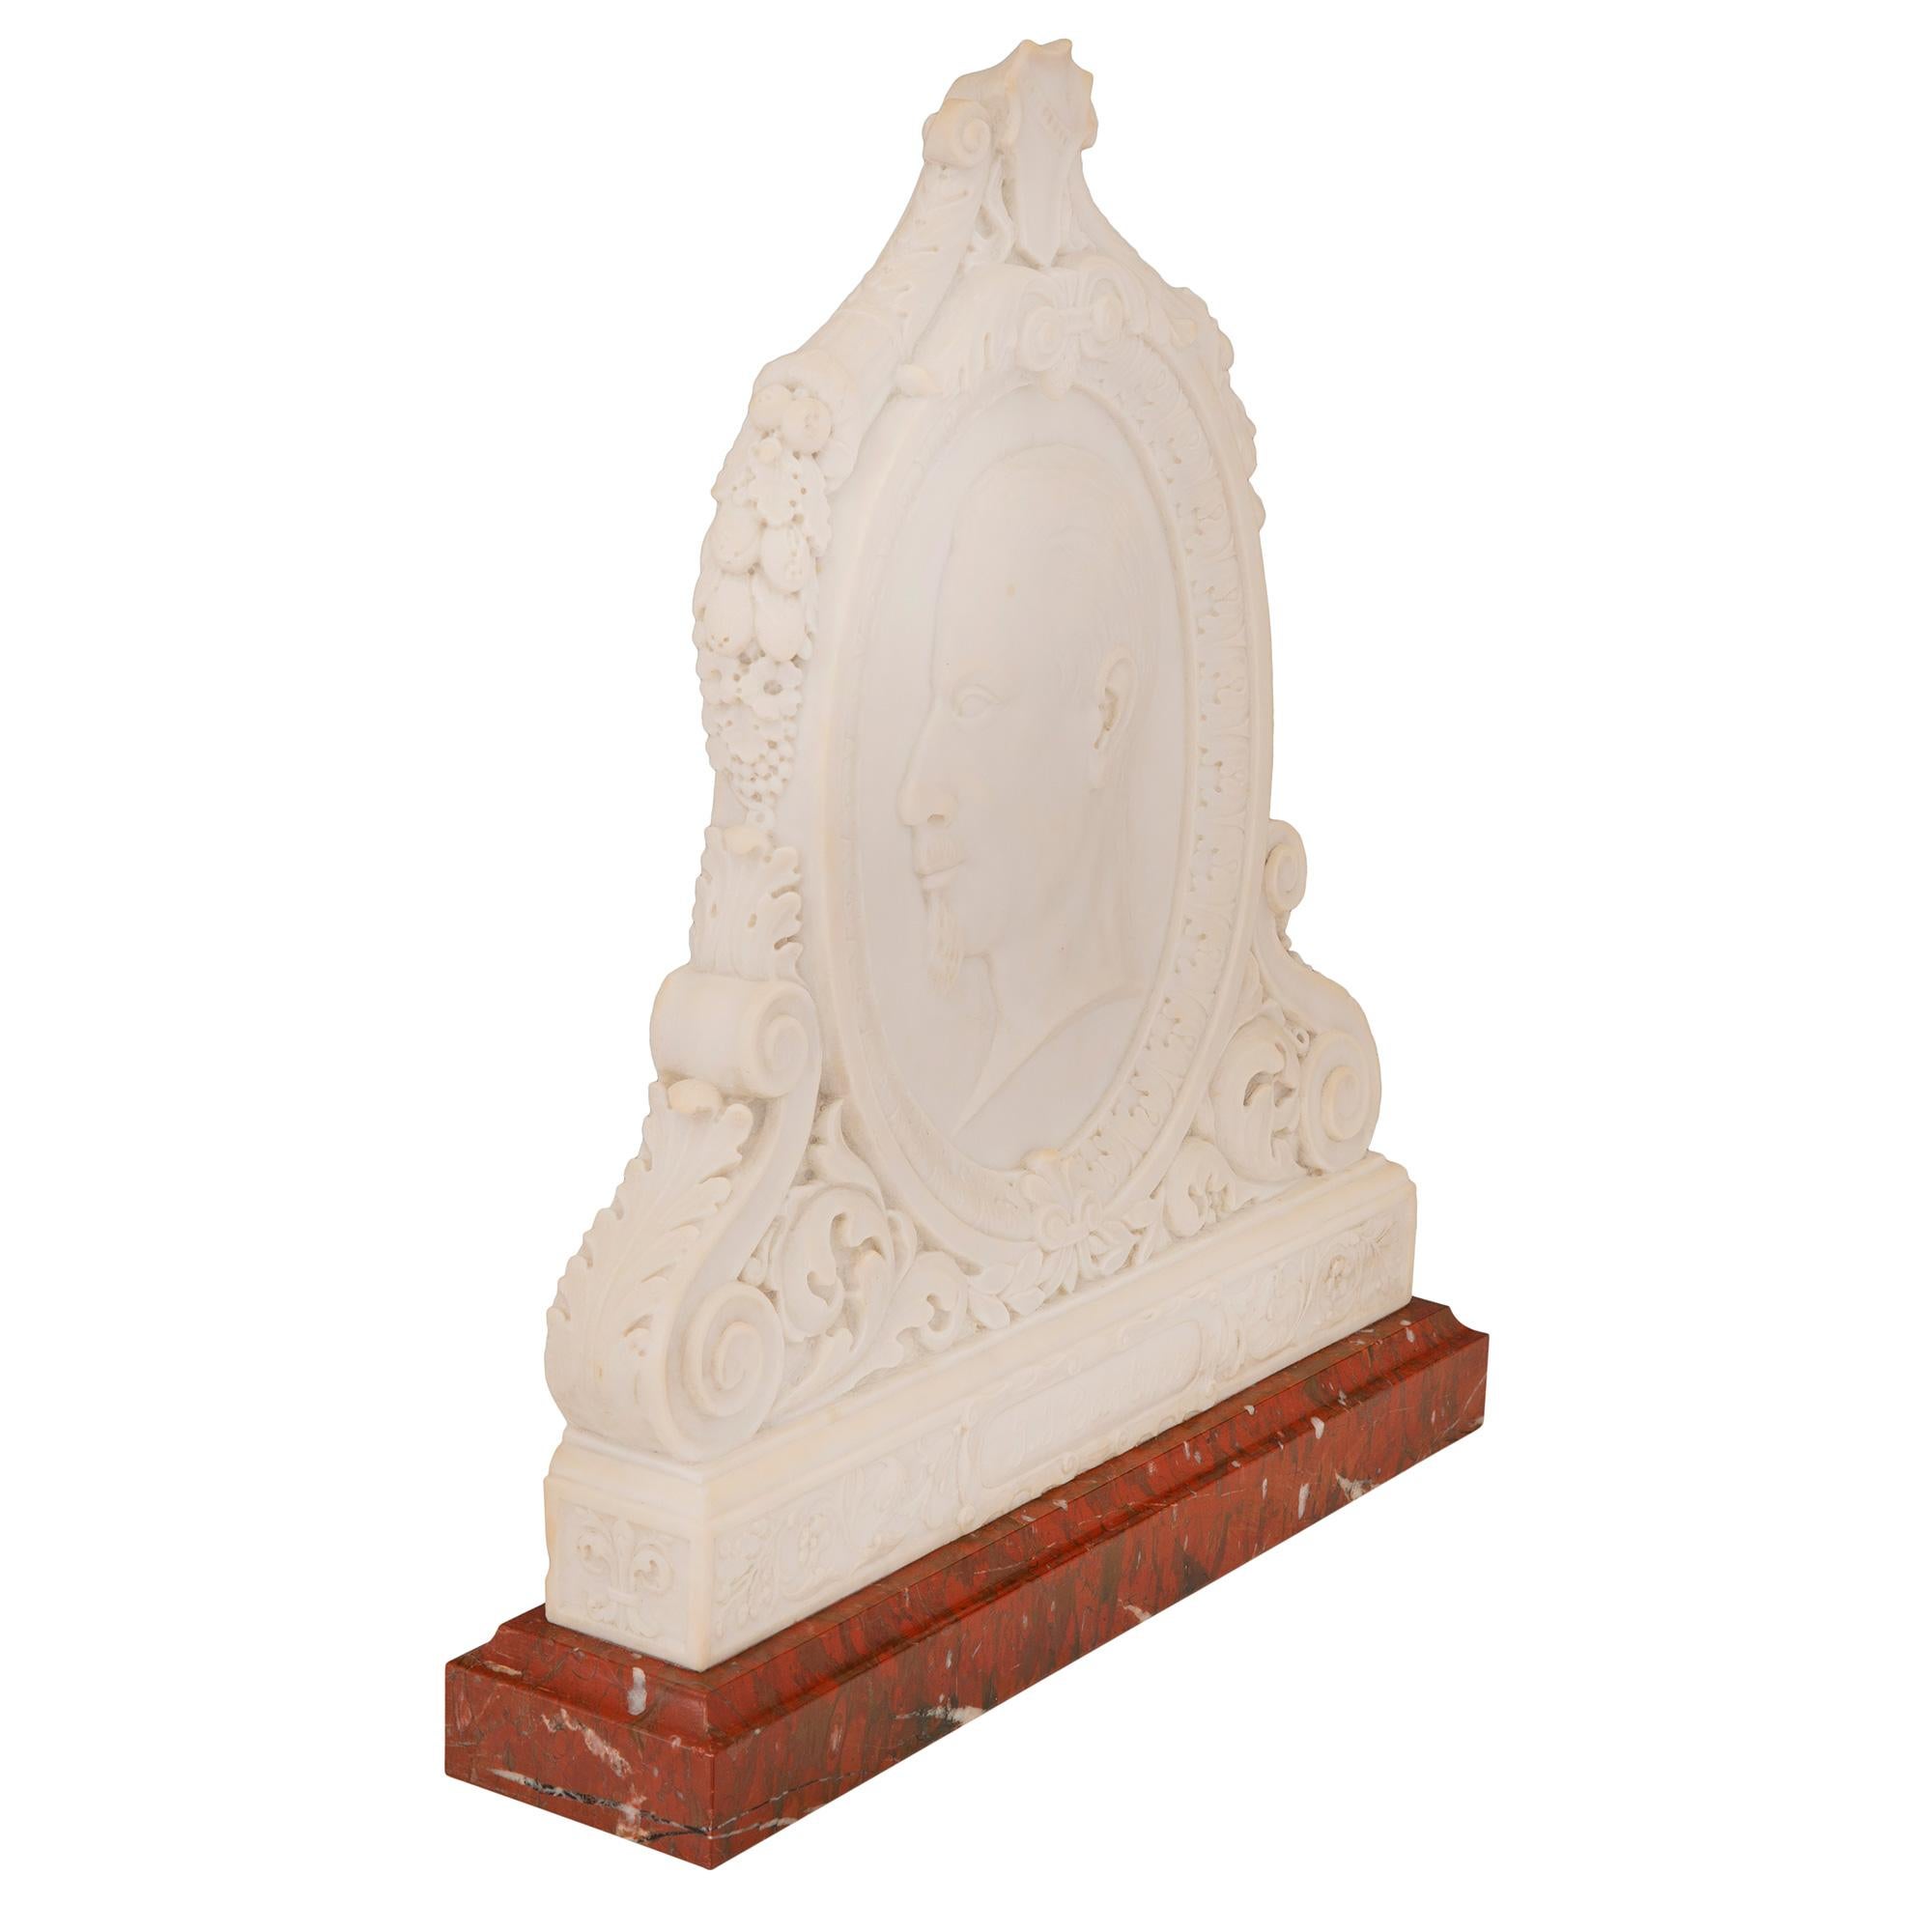 A beautiful and extremely high quality Italian 19th century Louis XVI St. white Carrara and Rouge Griotte marble freestanding plaque of Joseph Carlino, sculpted by Remo Liverzani. The most decorative plaque is raised by a beautiful Rouge Griotte